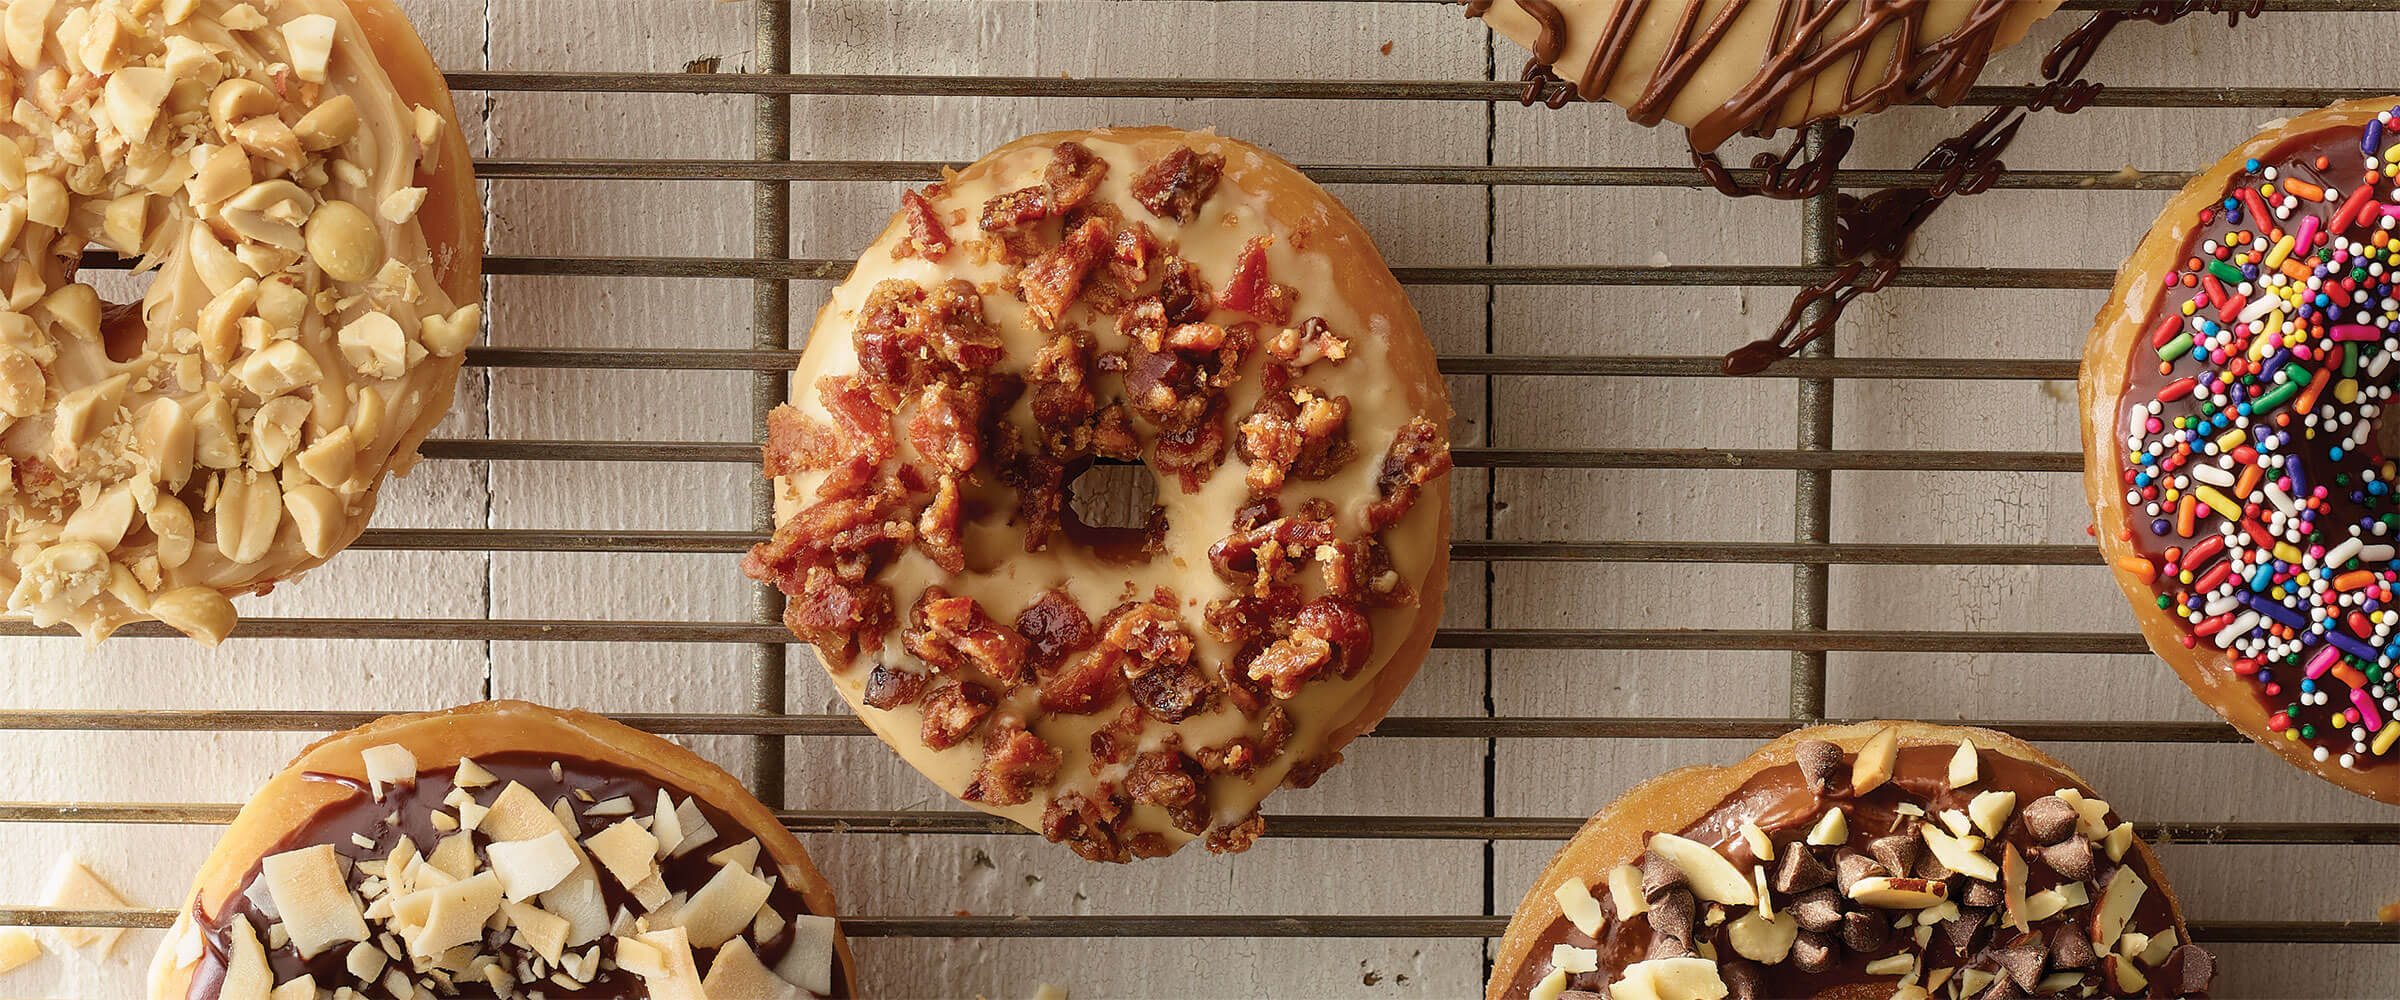 Candied Bacon PB Donut